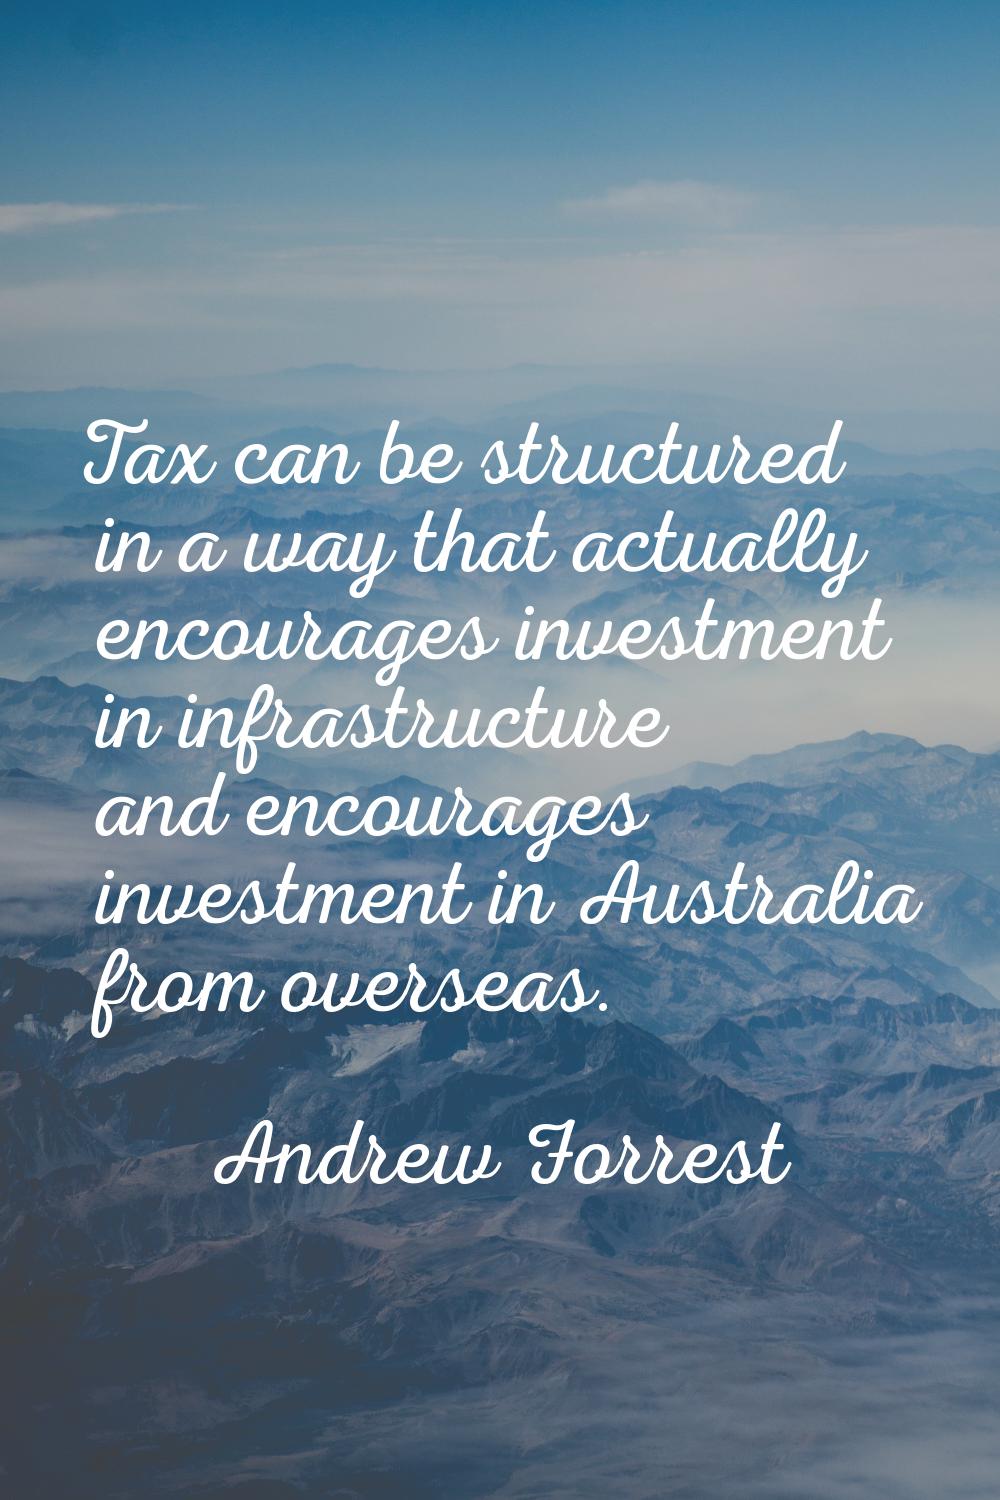 Tax can be structured in a way that actually encourages investment in infrastructure and encourages